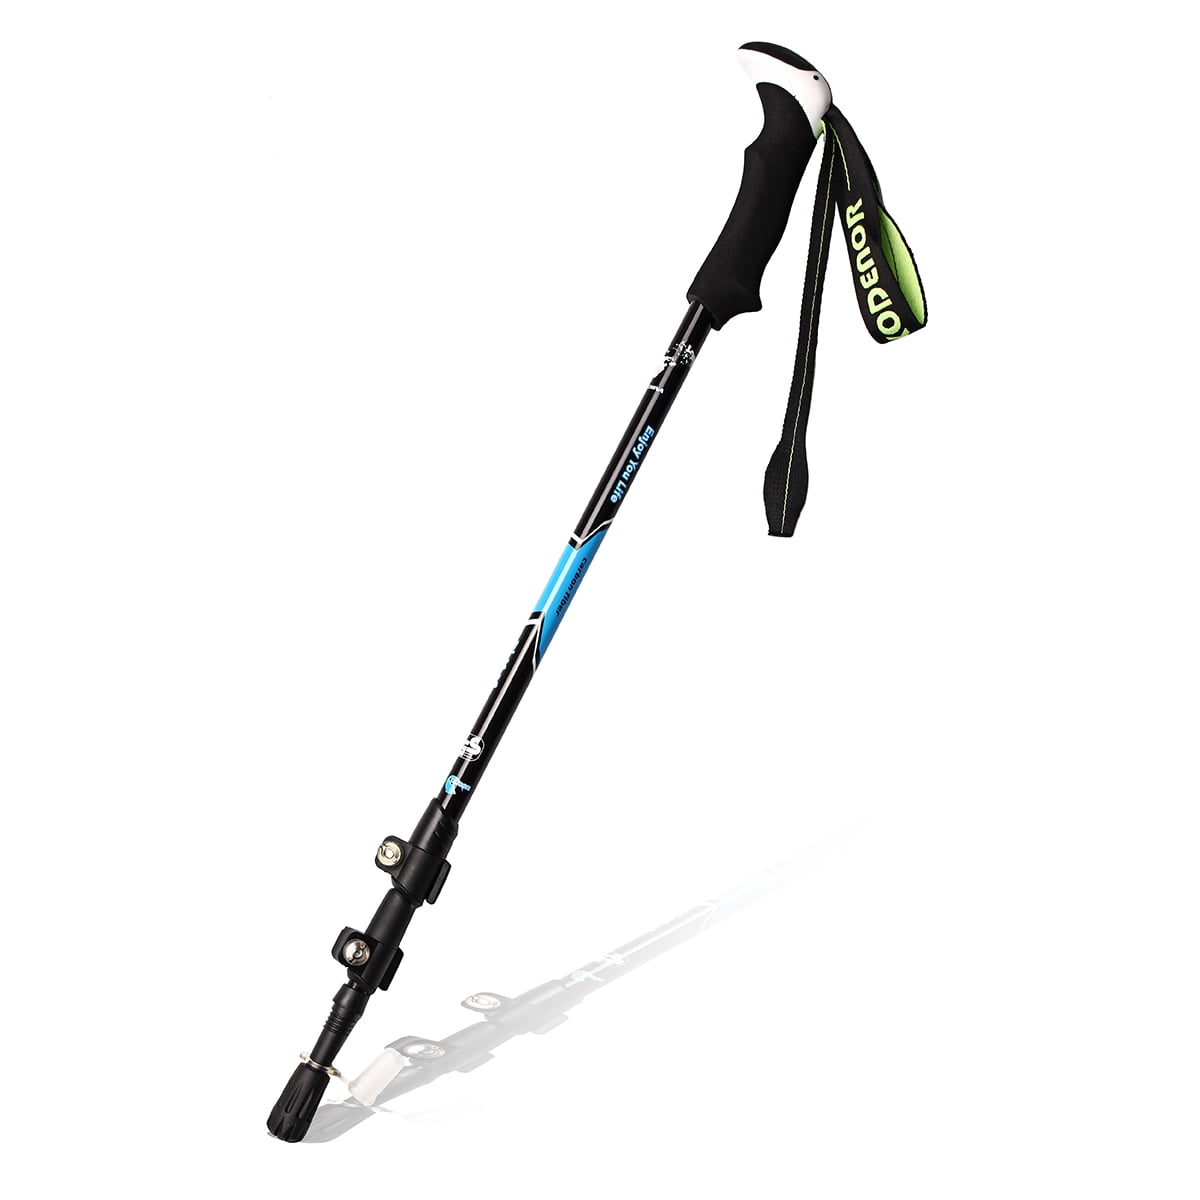 Walking Trekking Poles with Antishock and Quick Lock System, Telescopic,  Collapsible, Ultralight for Hiking, Camping, Mountaining, Backpacking,  Walking, Trekking 